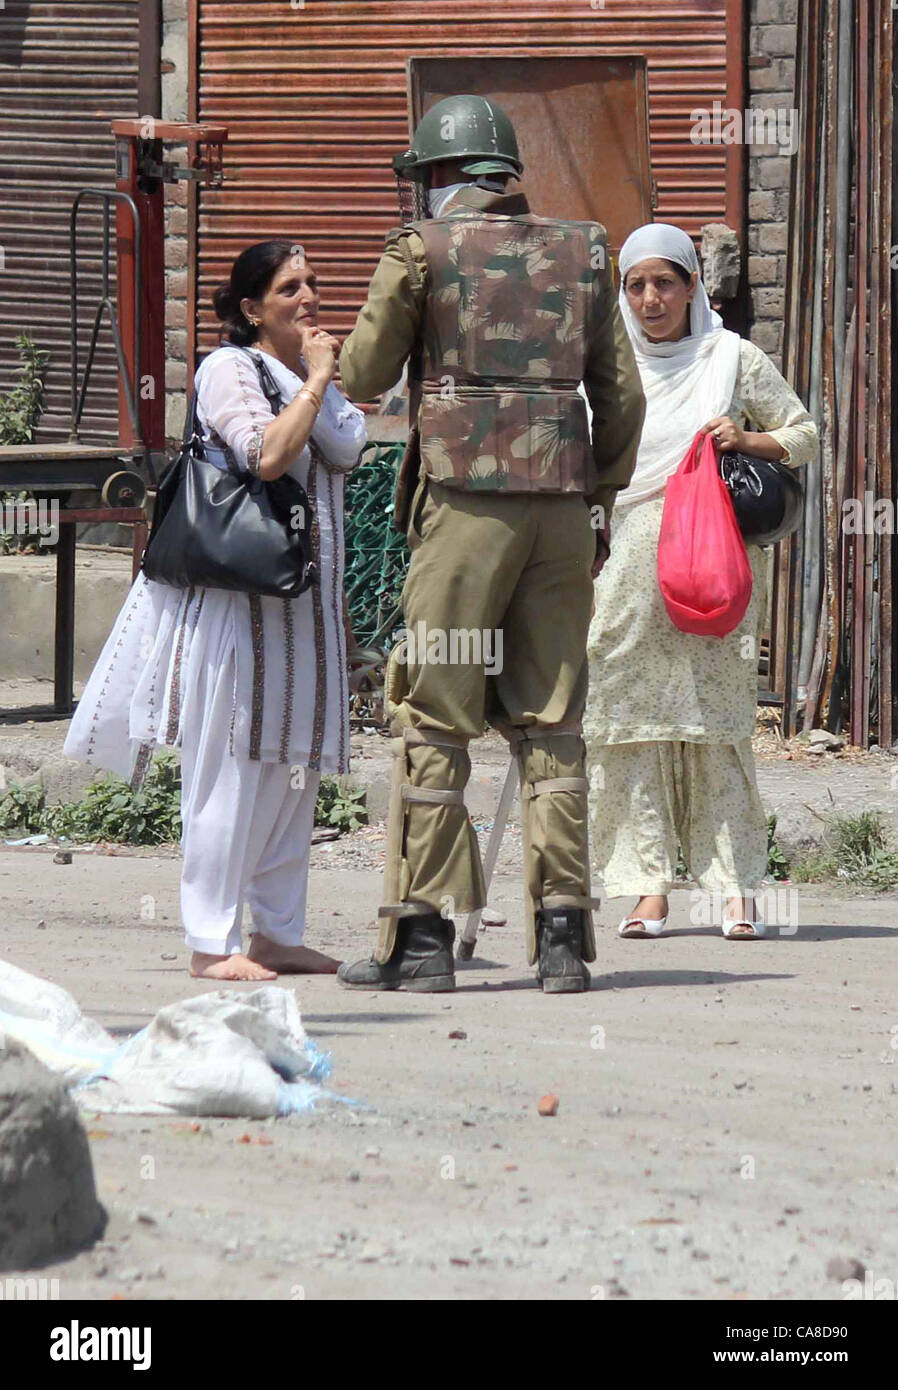 An Indian police questioning a Kashmiri Muslim woman during a curfew in downtown area of Srinagr, the summer capital of Indian Kashmir, 26, June, 2012,Undeclared curfew-like restrictions were imposed in the old city areas of Srinagar Tuesday following tension in the city over the gutting of the revered shrine of Sheikh Abdul Qadir Jeelani in the Khanyar area.Although no official announcement to this effect was made, police and paramilitary Central Reserve Police Force (CRPF) deployed in riot control gear disallowed pedestrian and vehicular movement in old city areas falling under the Khanyar,  Stock Photo